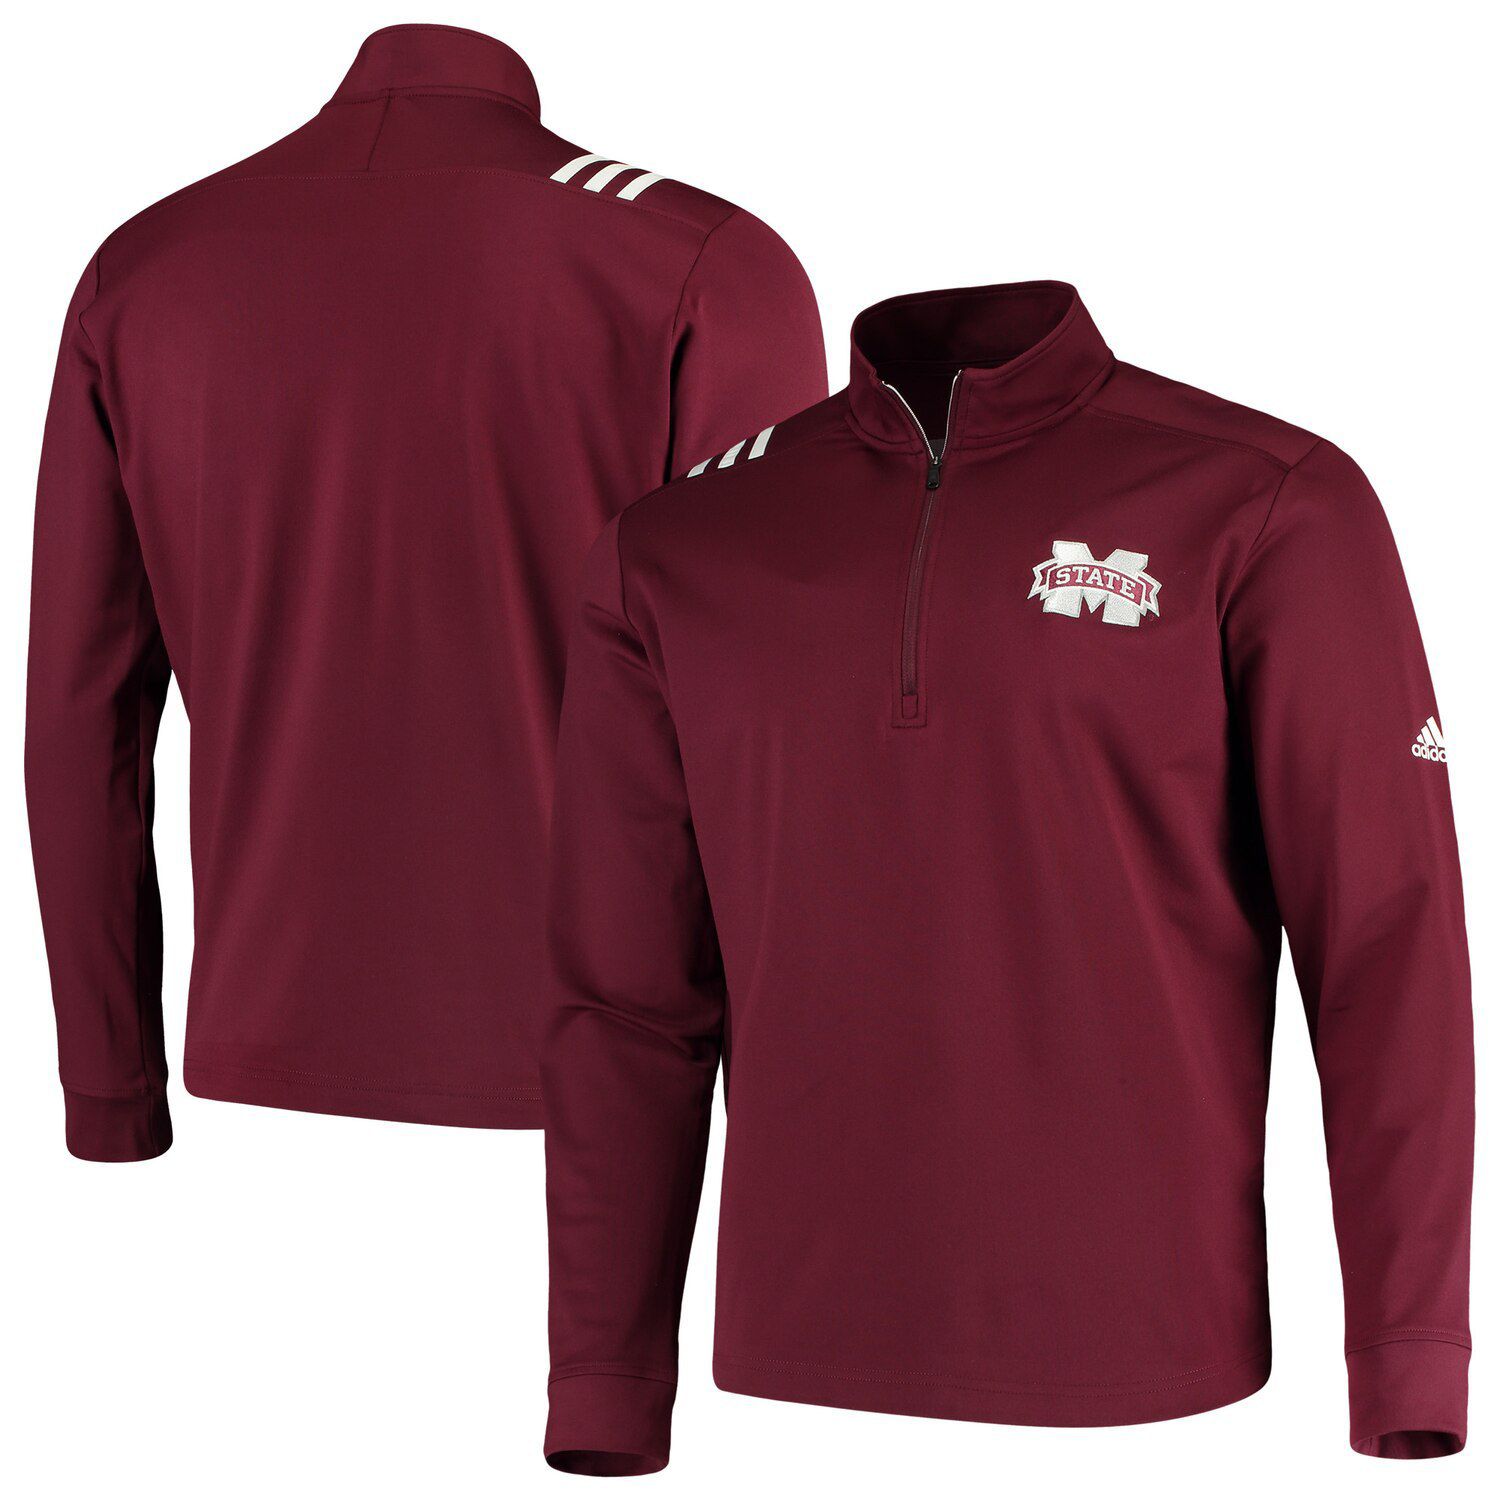 Mississippi State Bulldogs adidas 